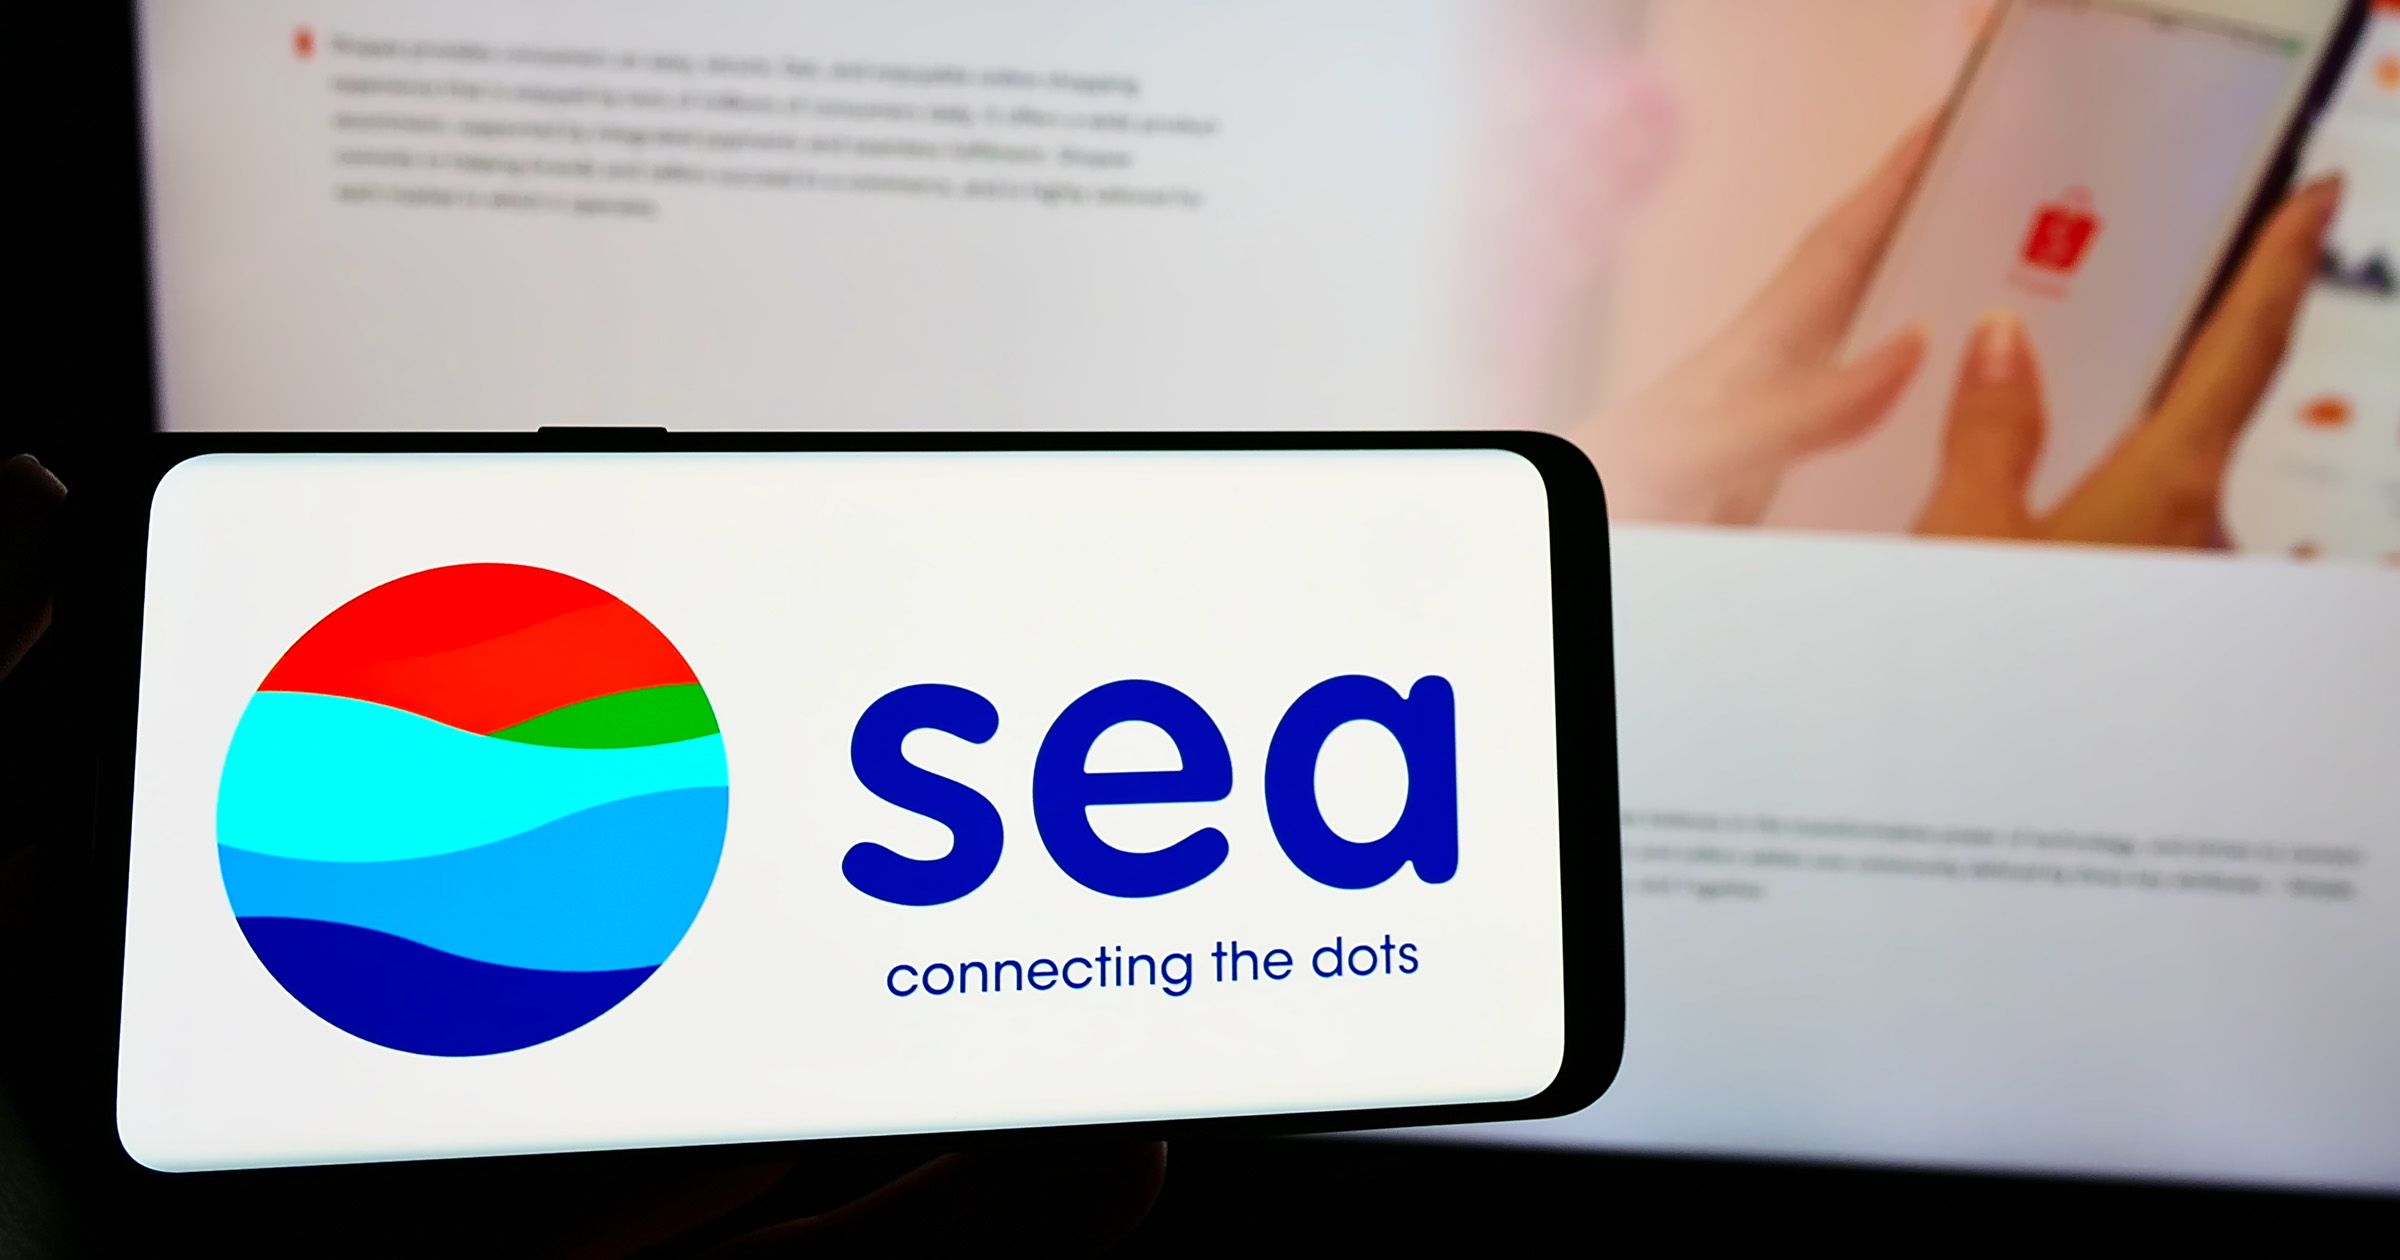 Sea Ltd. is growing again, doubles in valuation to US$40 billion in just 4 months